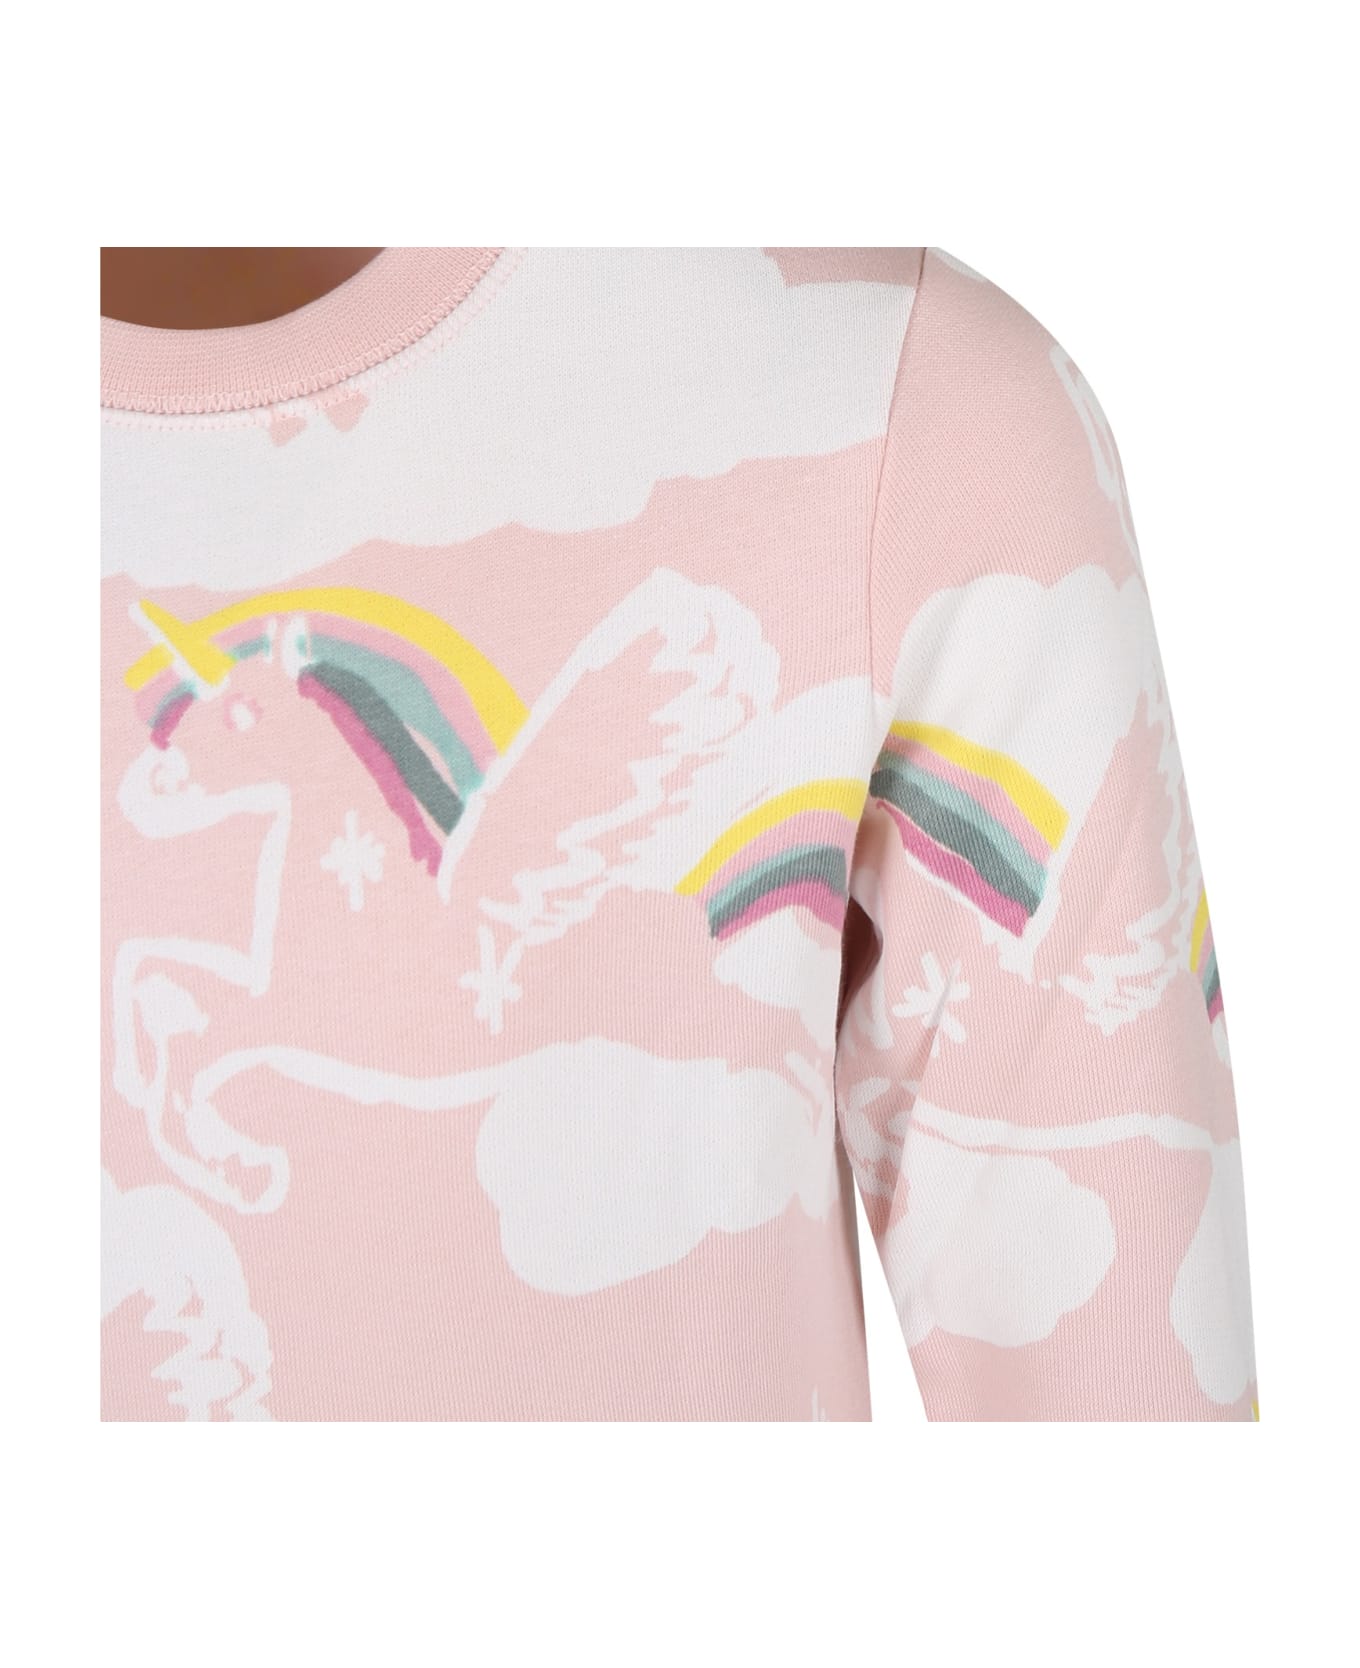 Stella McCartney Kids Pink Suit For Girl With Unicorn - Pink